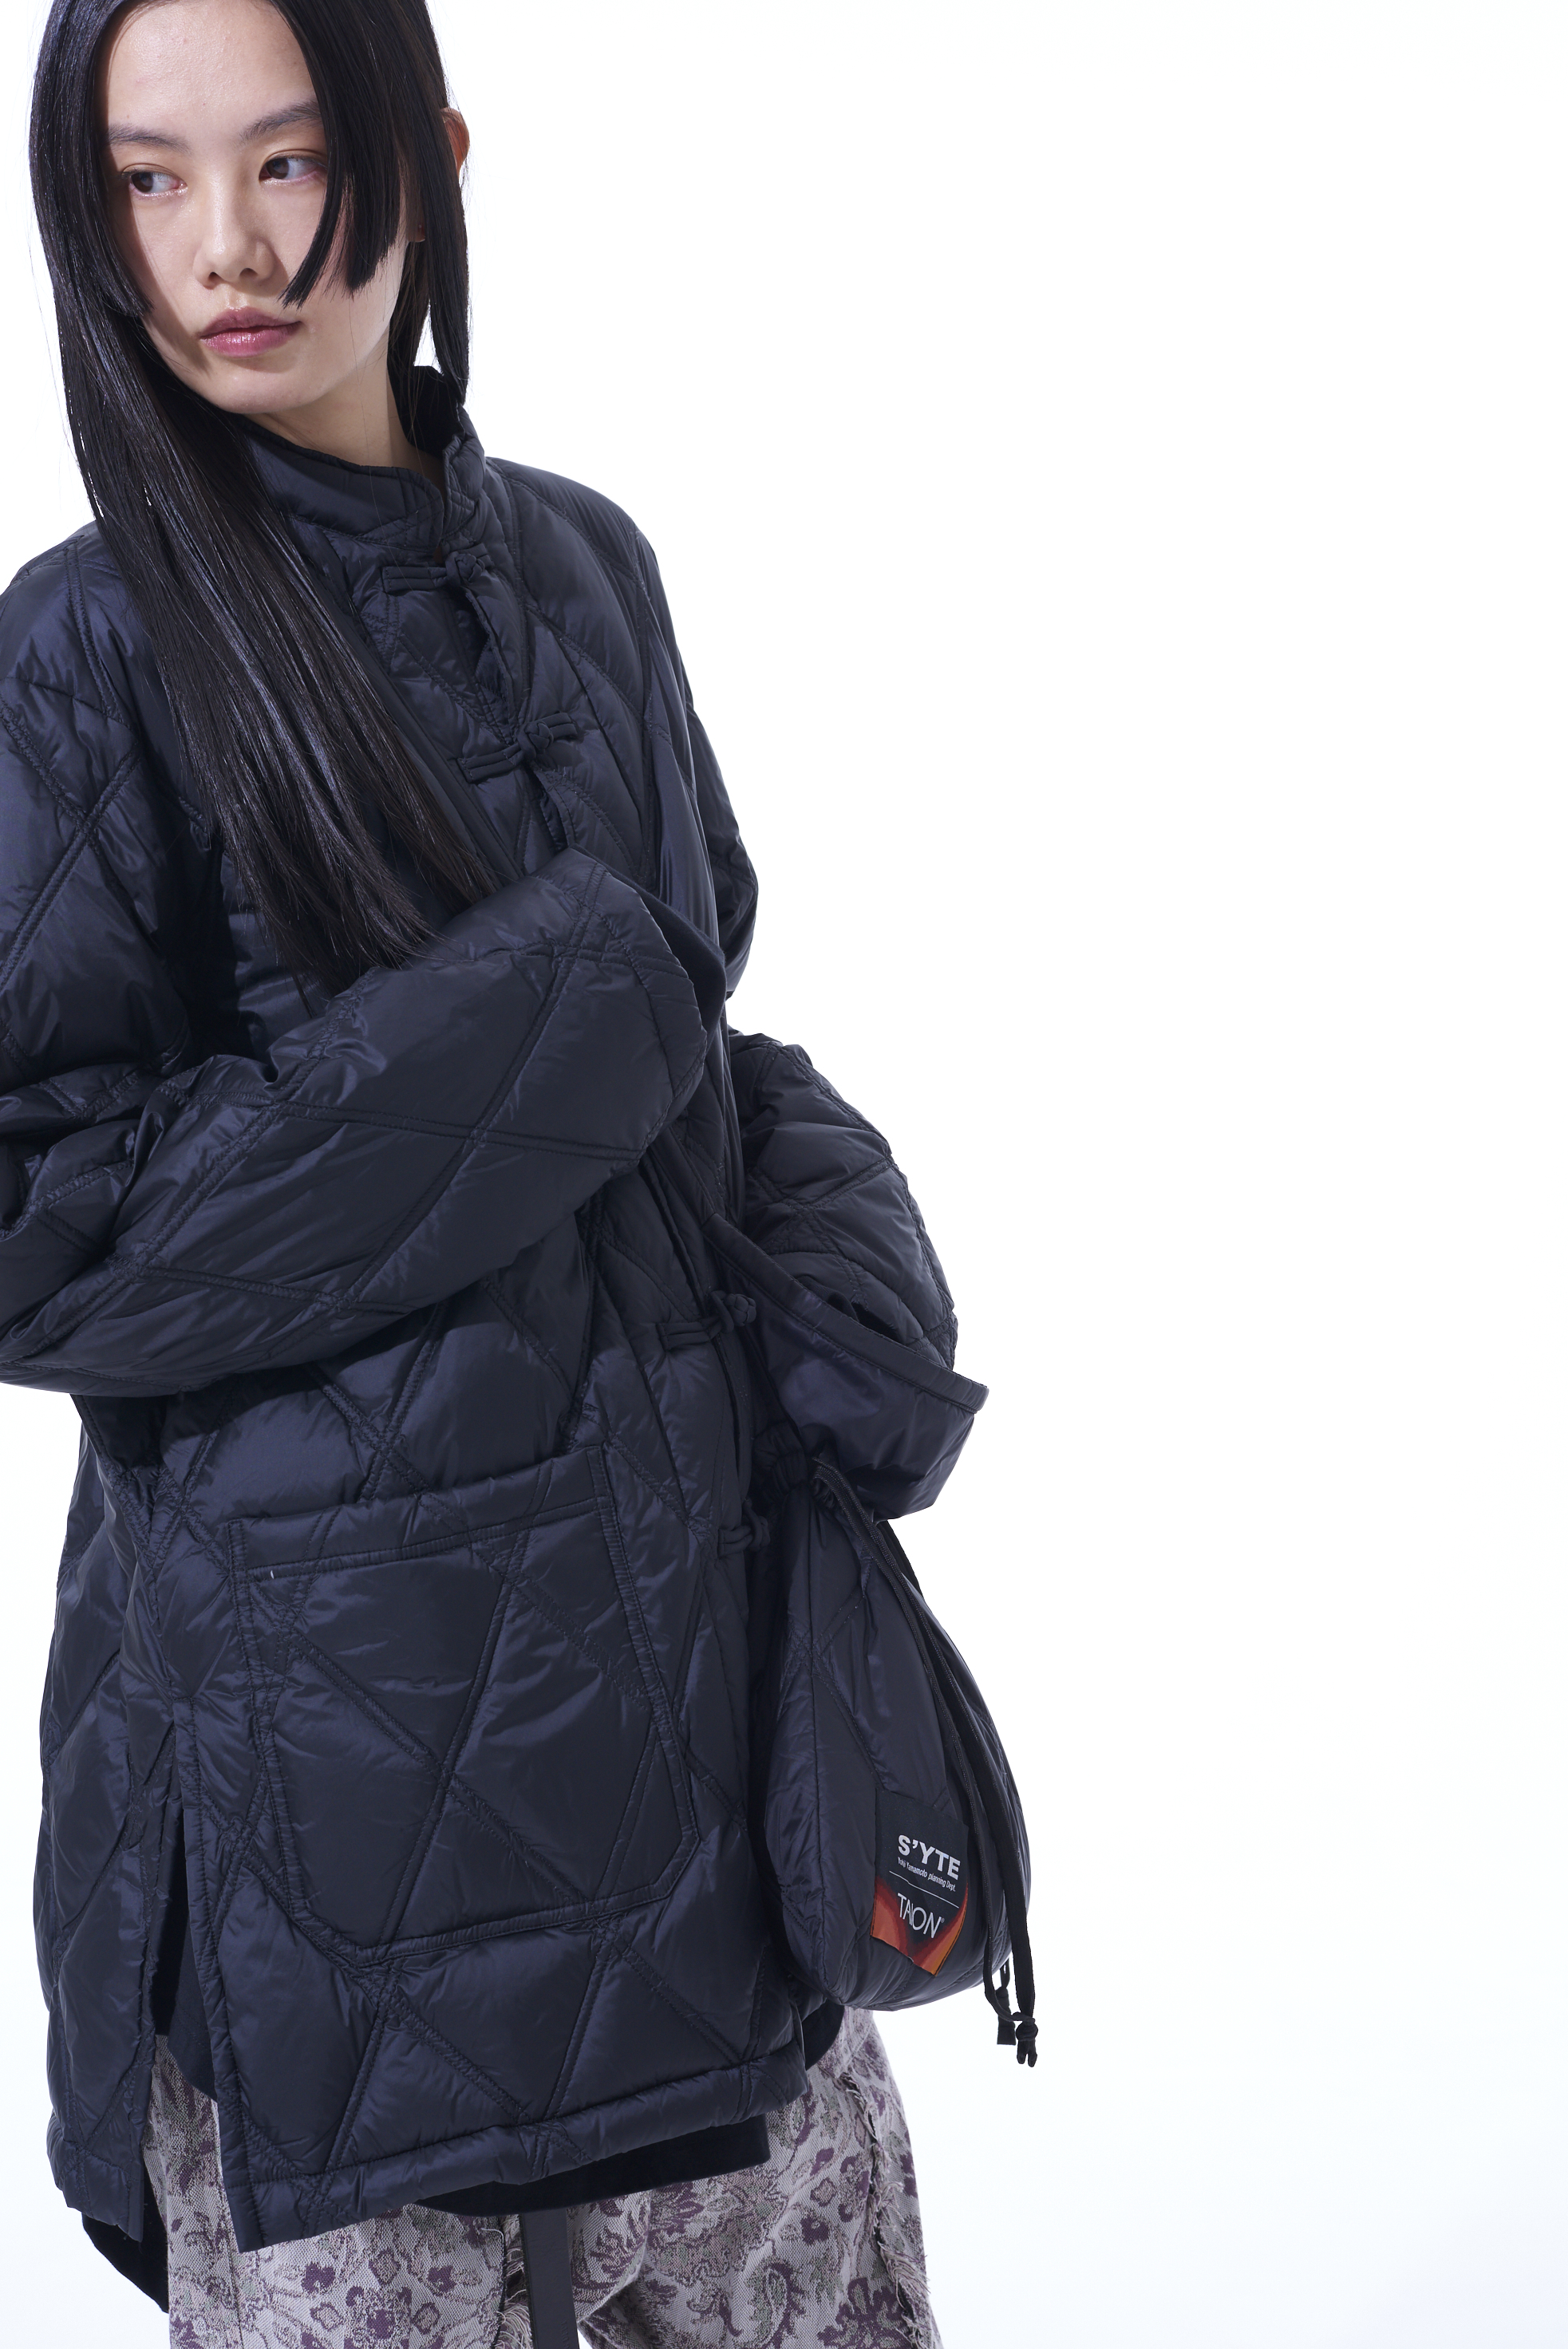 【S'YTE x TAION】Collaboration Collection QUILTED DOWN APRON BAG